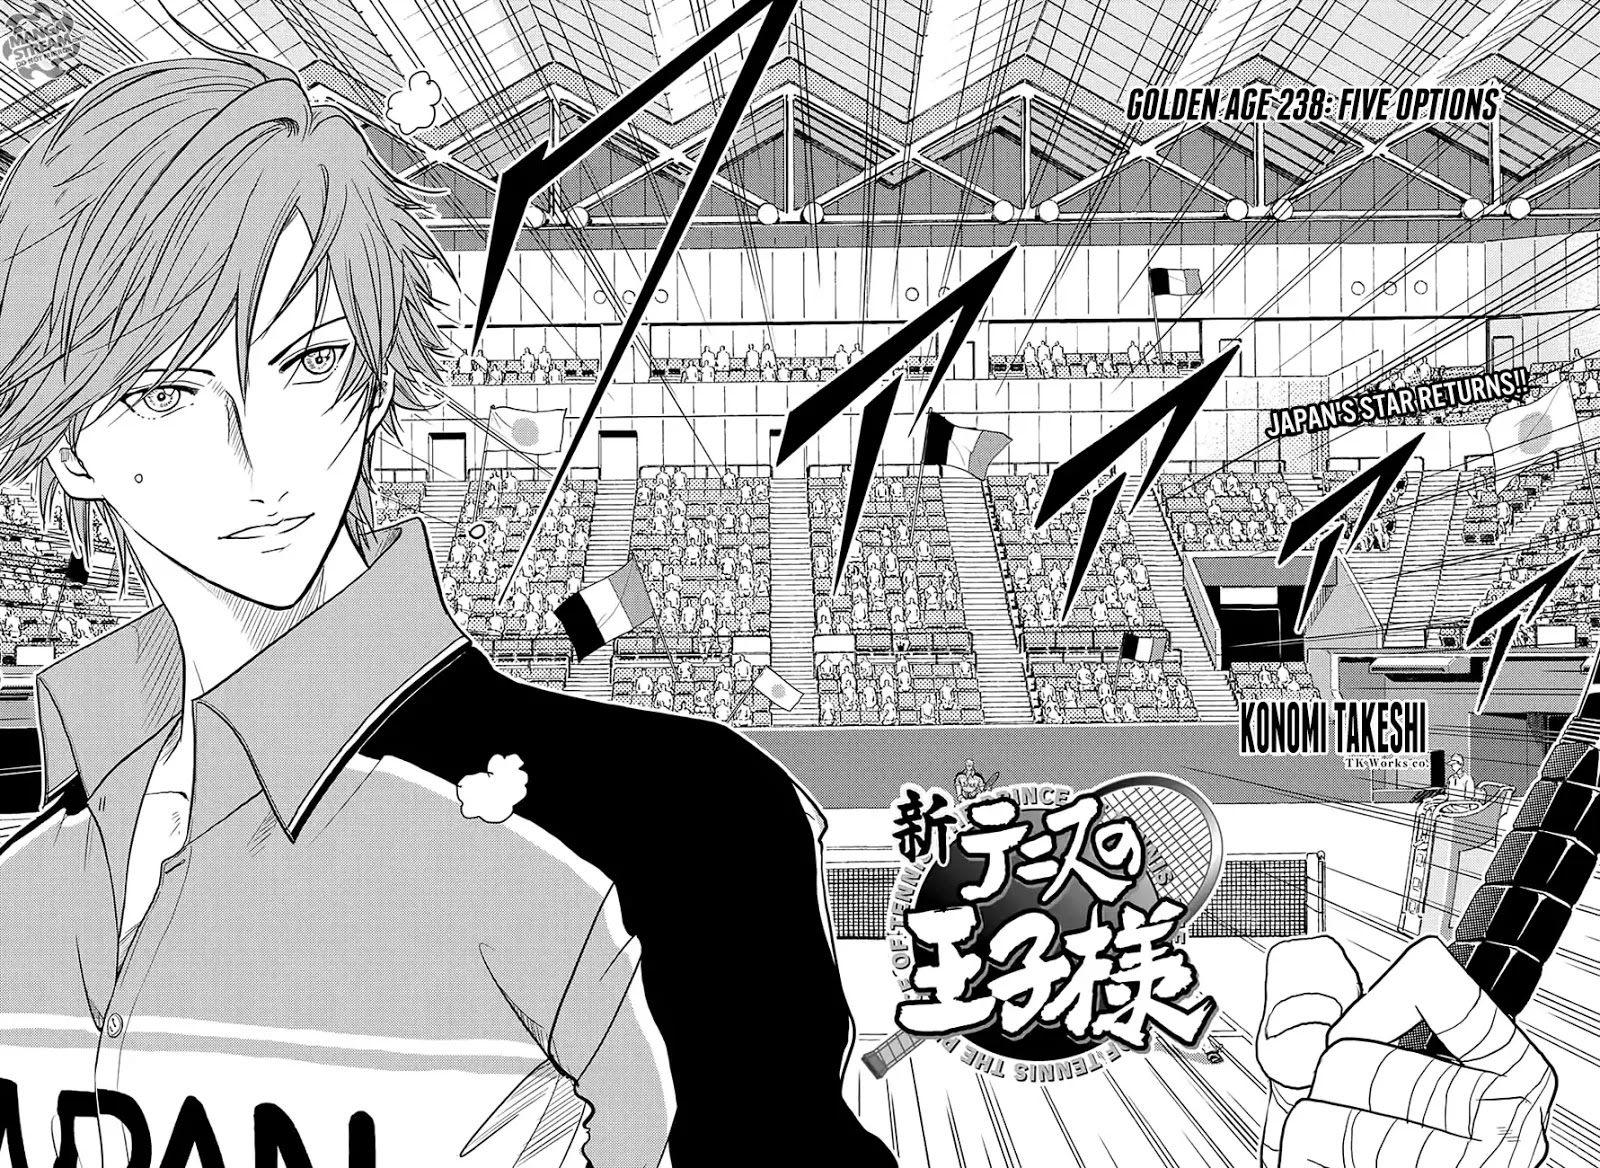 New Prince Of Tennis Chapter 238: Five Options - Picture 3